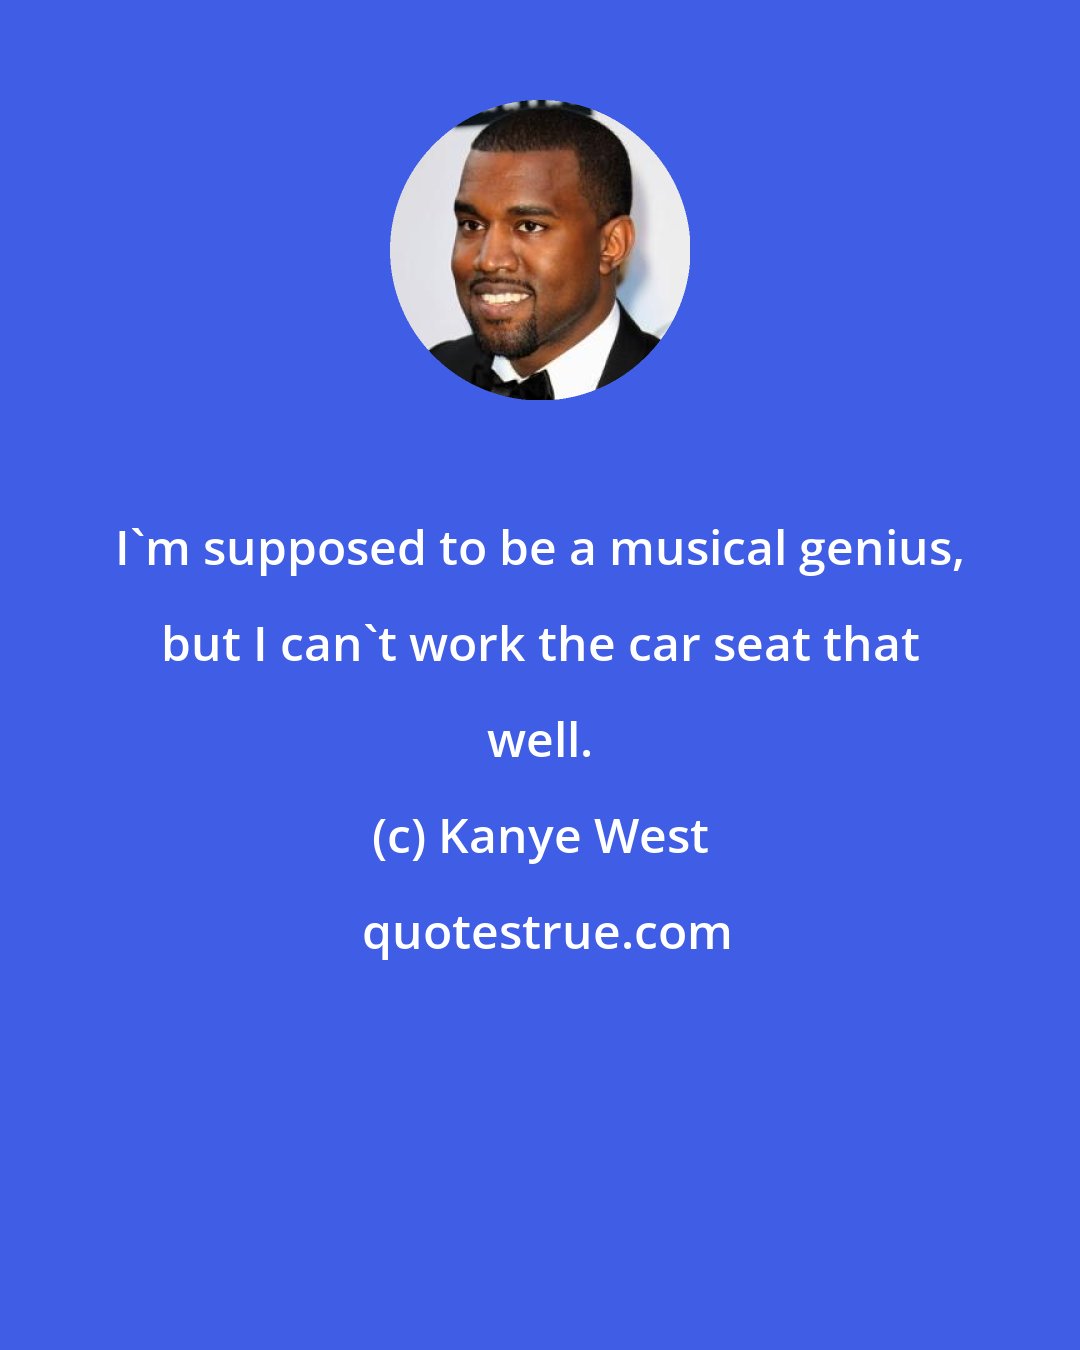 Kanye West: I'm supposed to be a musical genius, but I can't work the car seat that well.